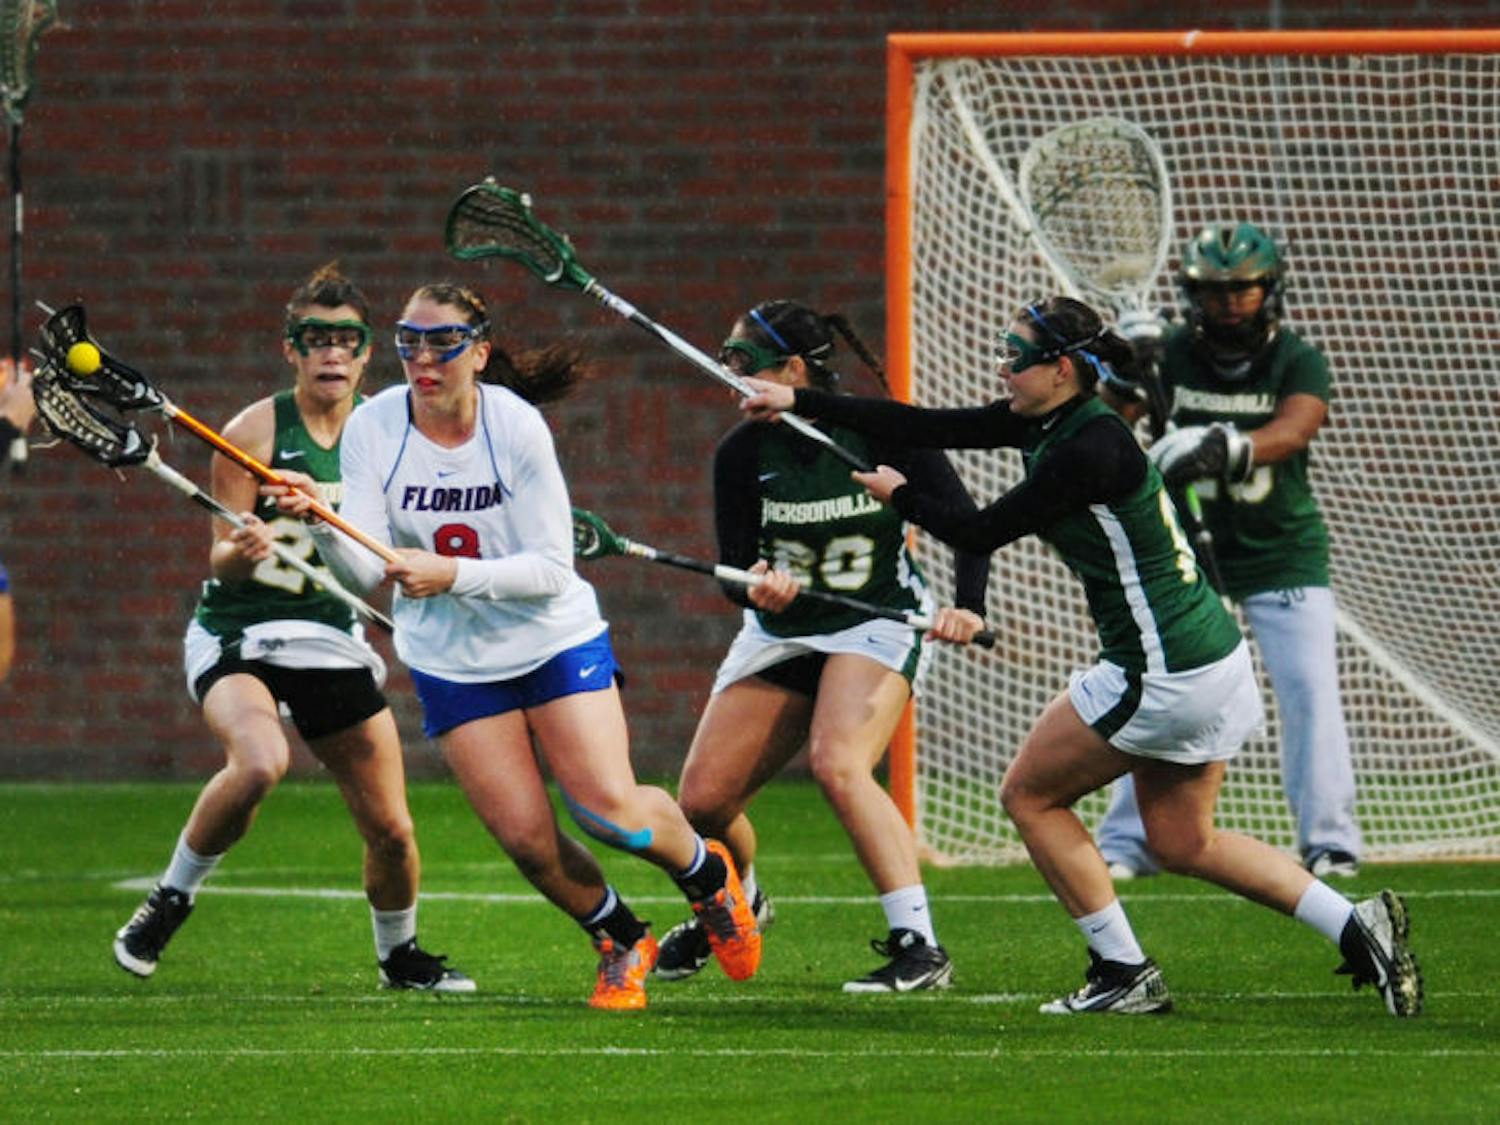 Shannon Gilroy breaks away from a group of defenders during Florida’s 21-5 win against Jacksonville on Feb. 12 at Donald R. Dizney Stadium.